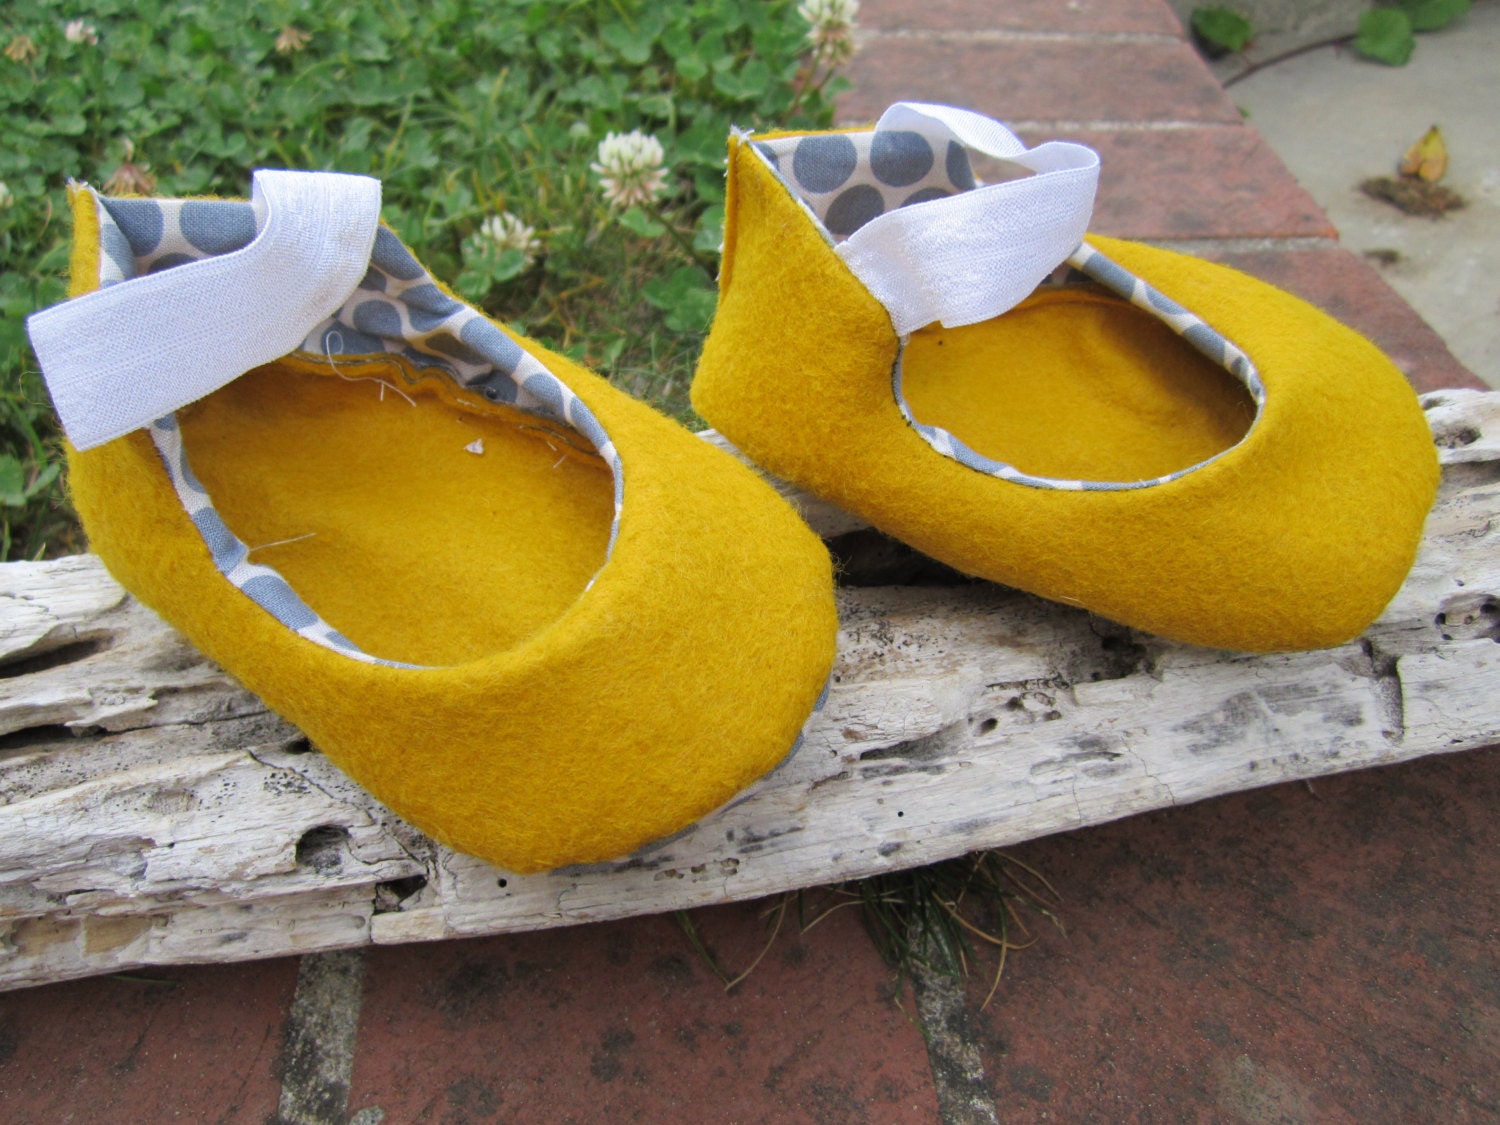 Ogres by jam Mellow Yellow natural wool felt baby mary jane shoes crib shoes, with grey polka dot lining - Ogresbyjam